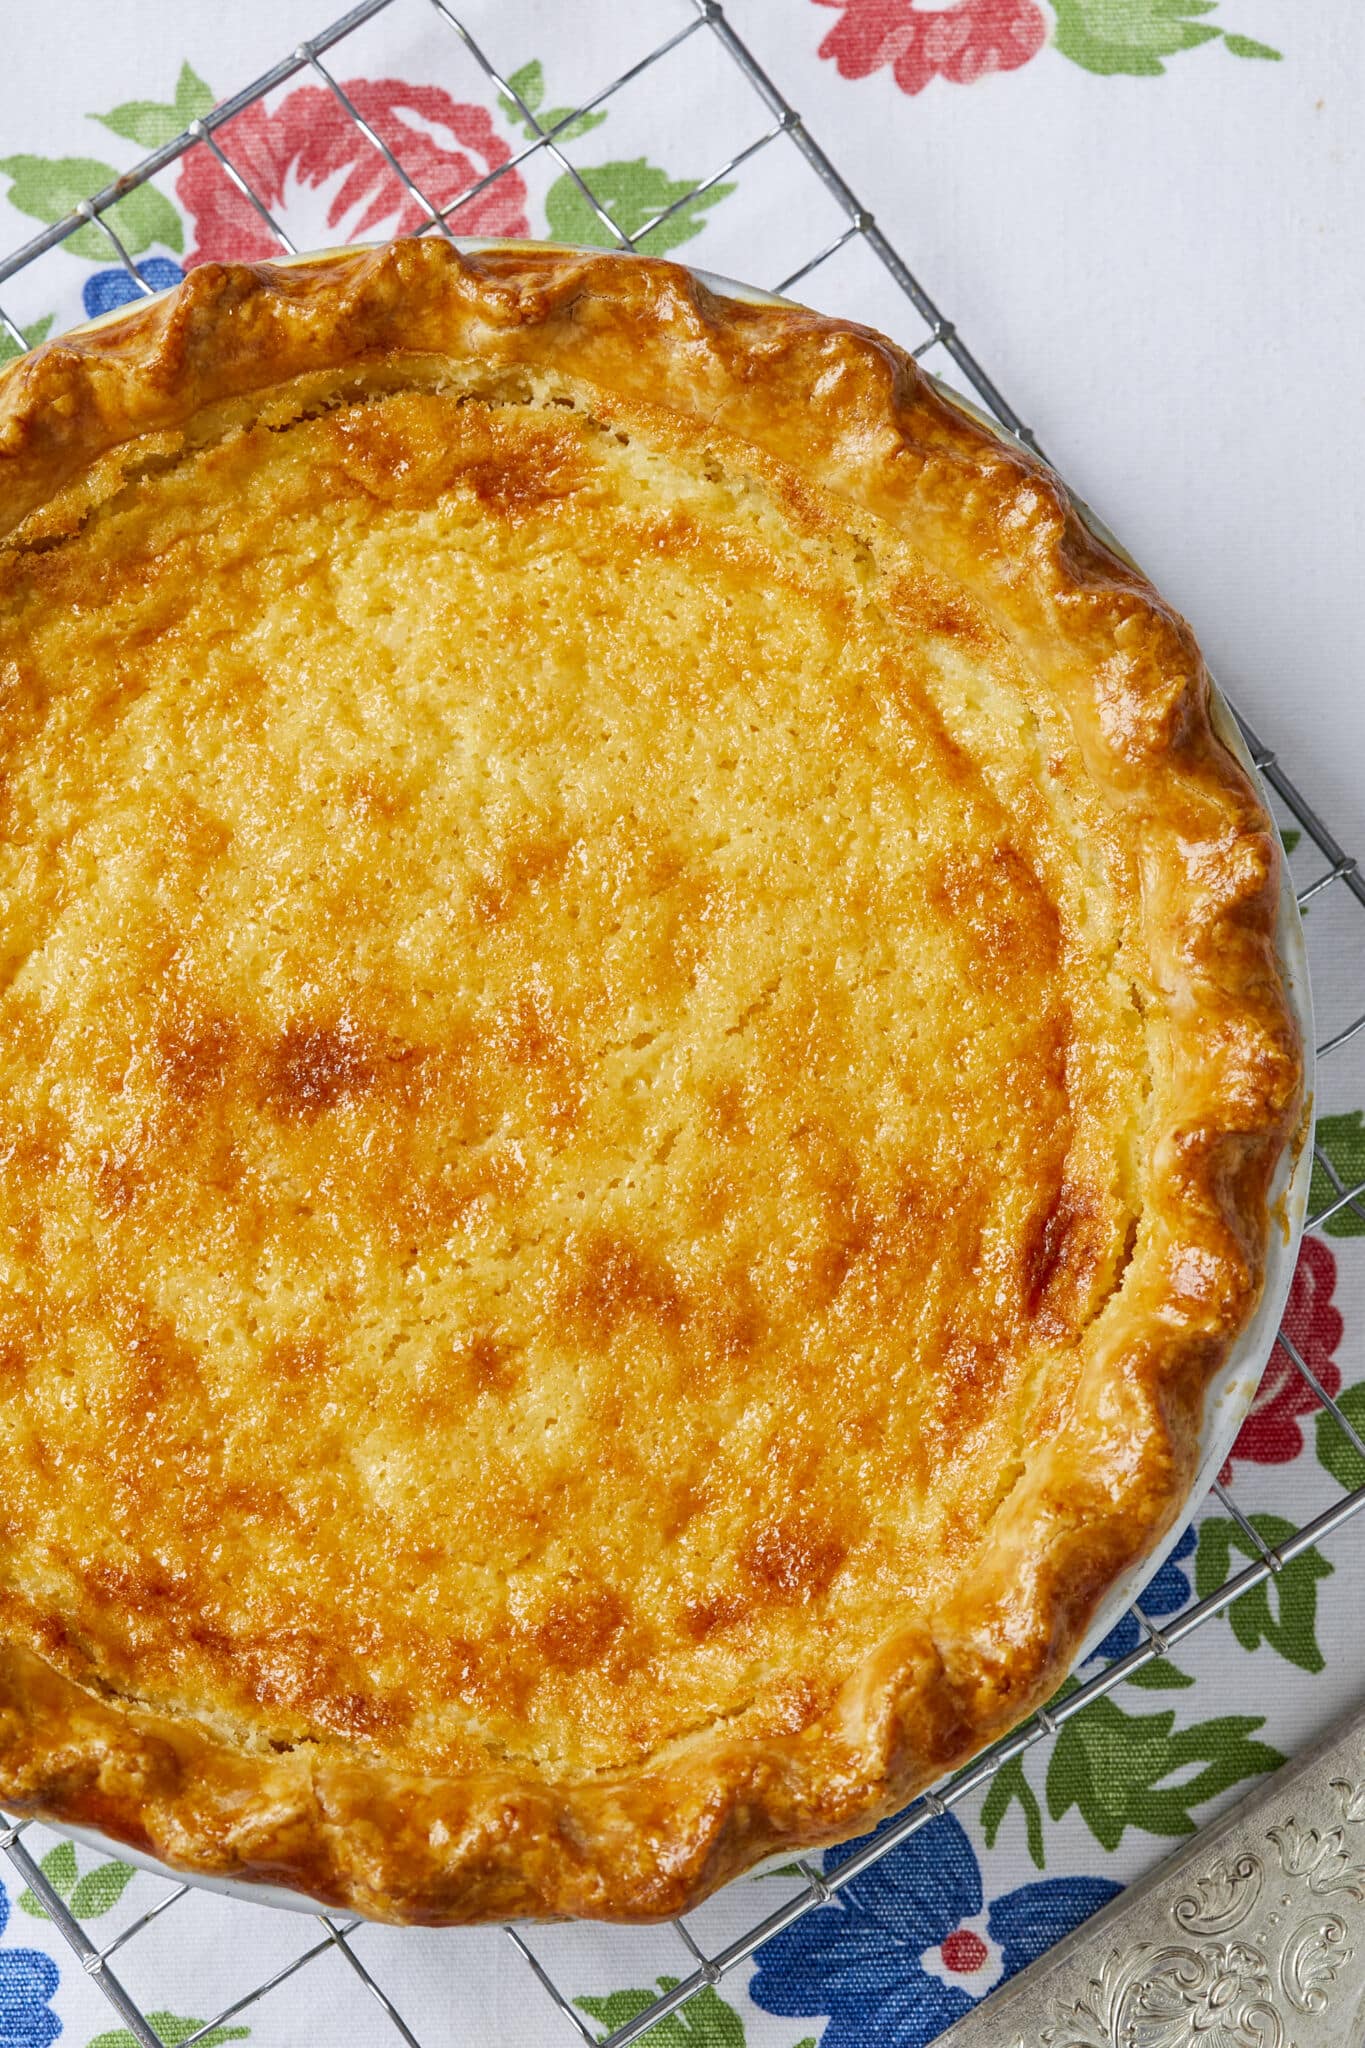 A close shot at the most part of an Irresistible Buttermilk Pie which is baked perfect with golden-brown crust and creamy, tangy filling. It's cooling on a wire rack. 